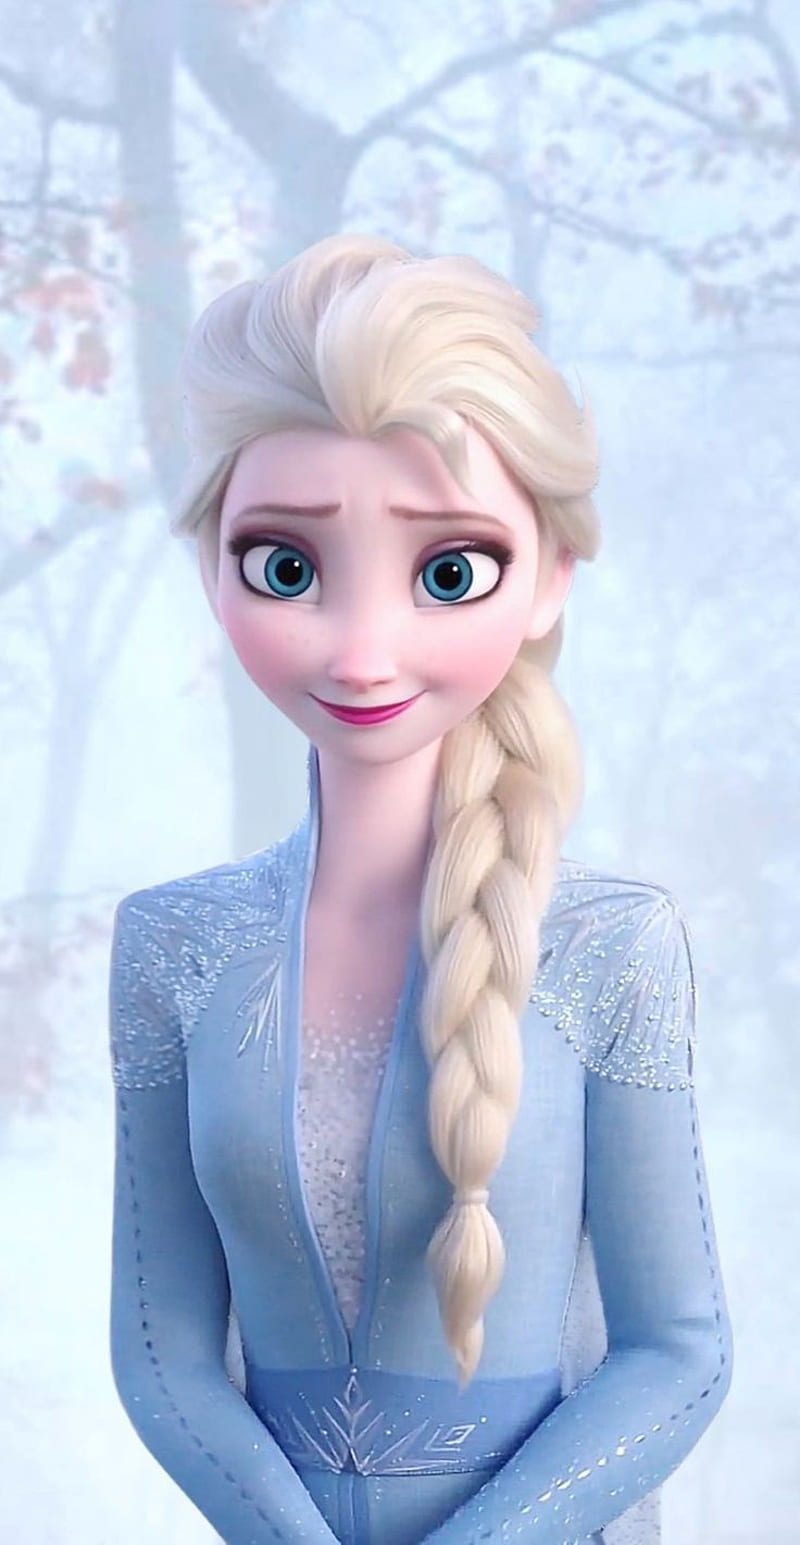 An Incredible Collection of 999+ Frozen Princess Images in Full 4K